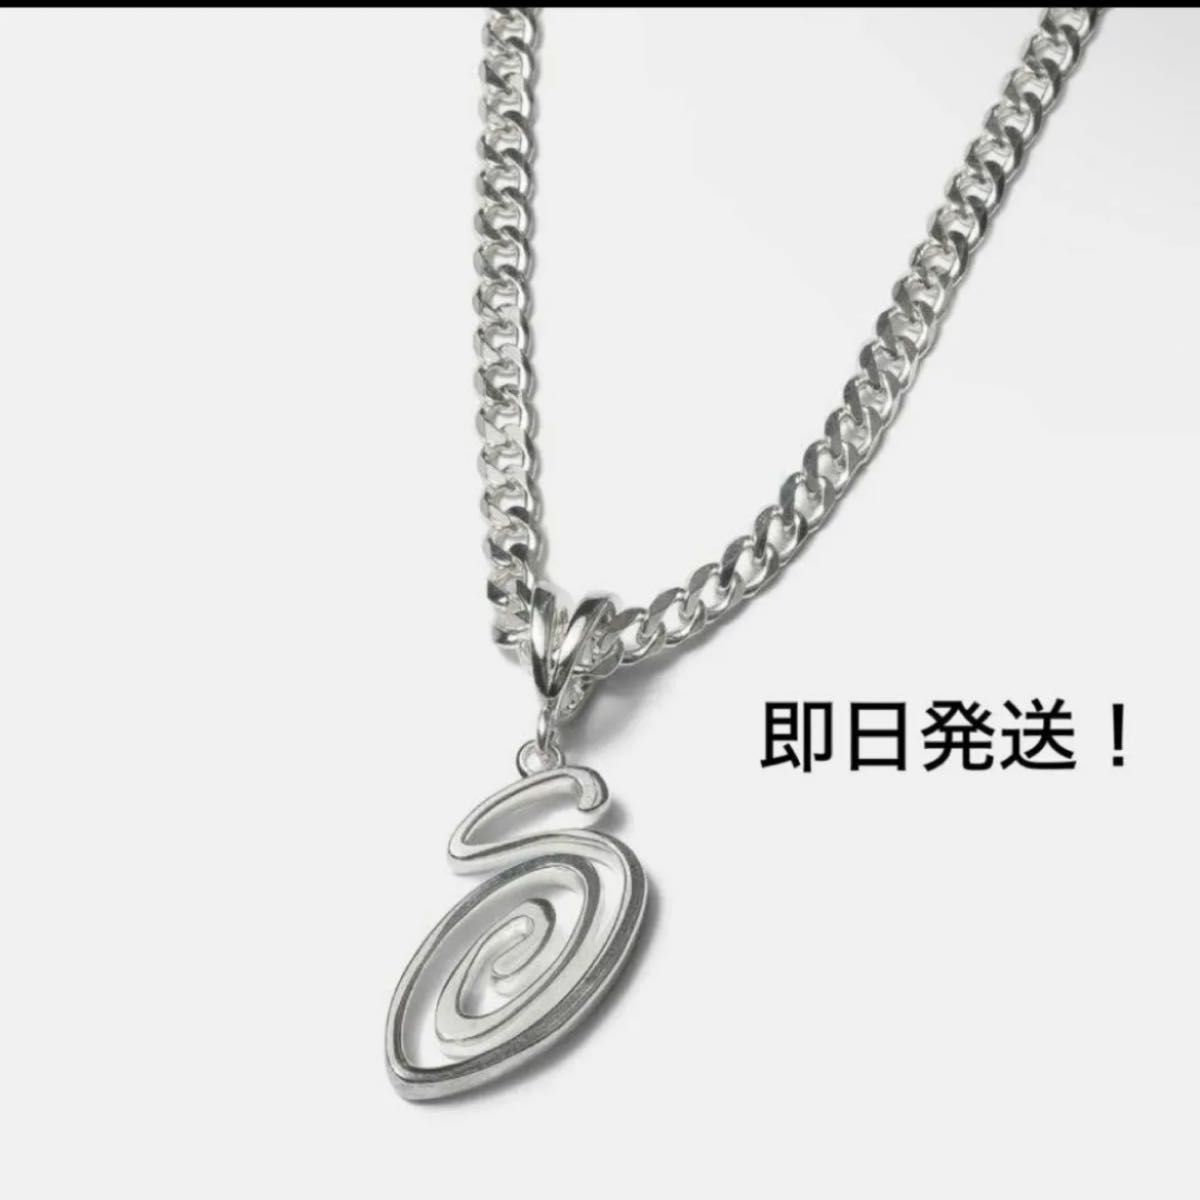 Stussy Jewelry Swirly S Chain Necklace ネックレス シルバー アクセサリー